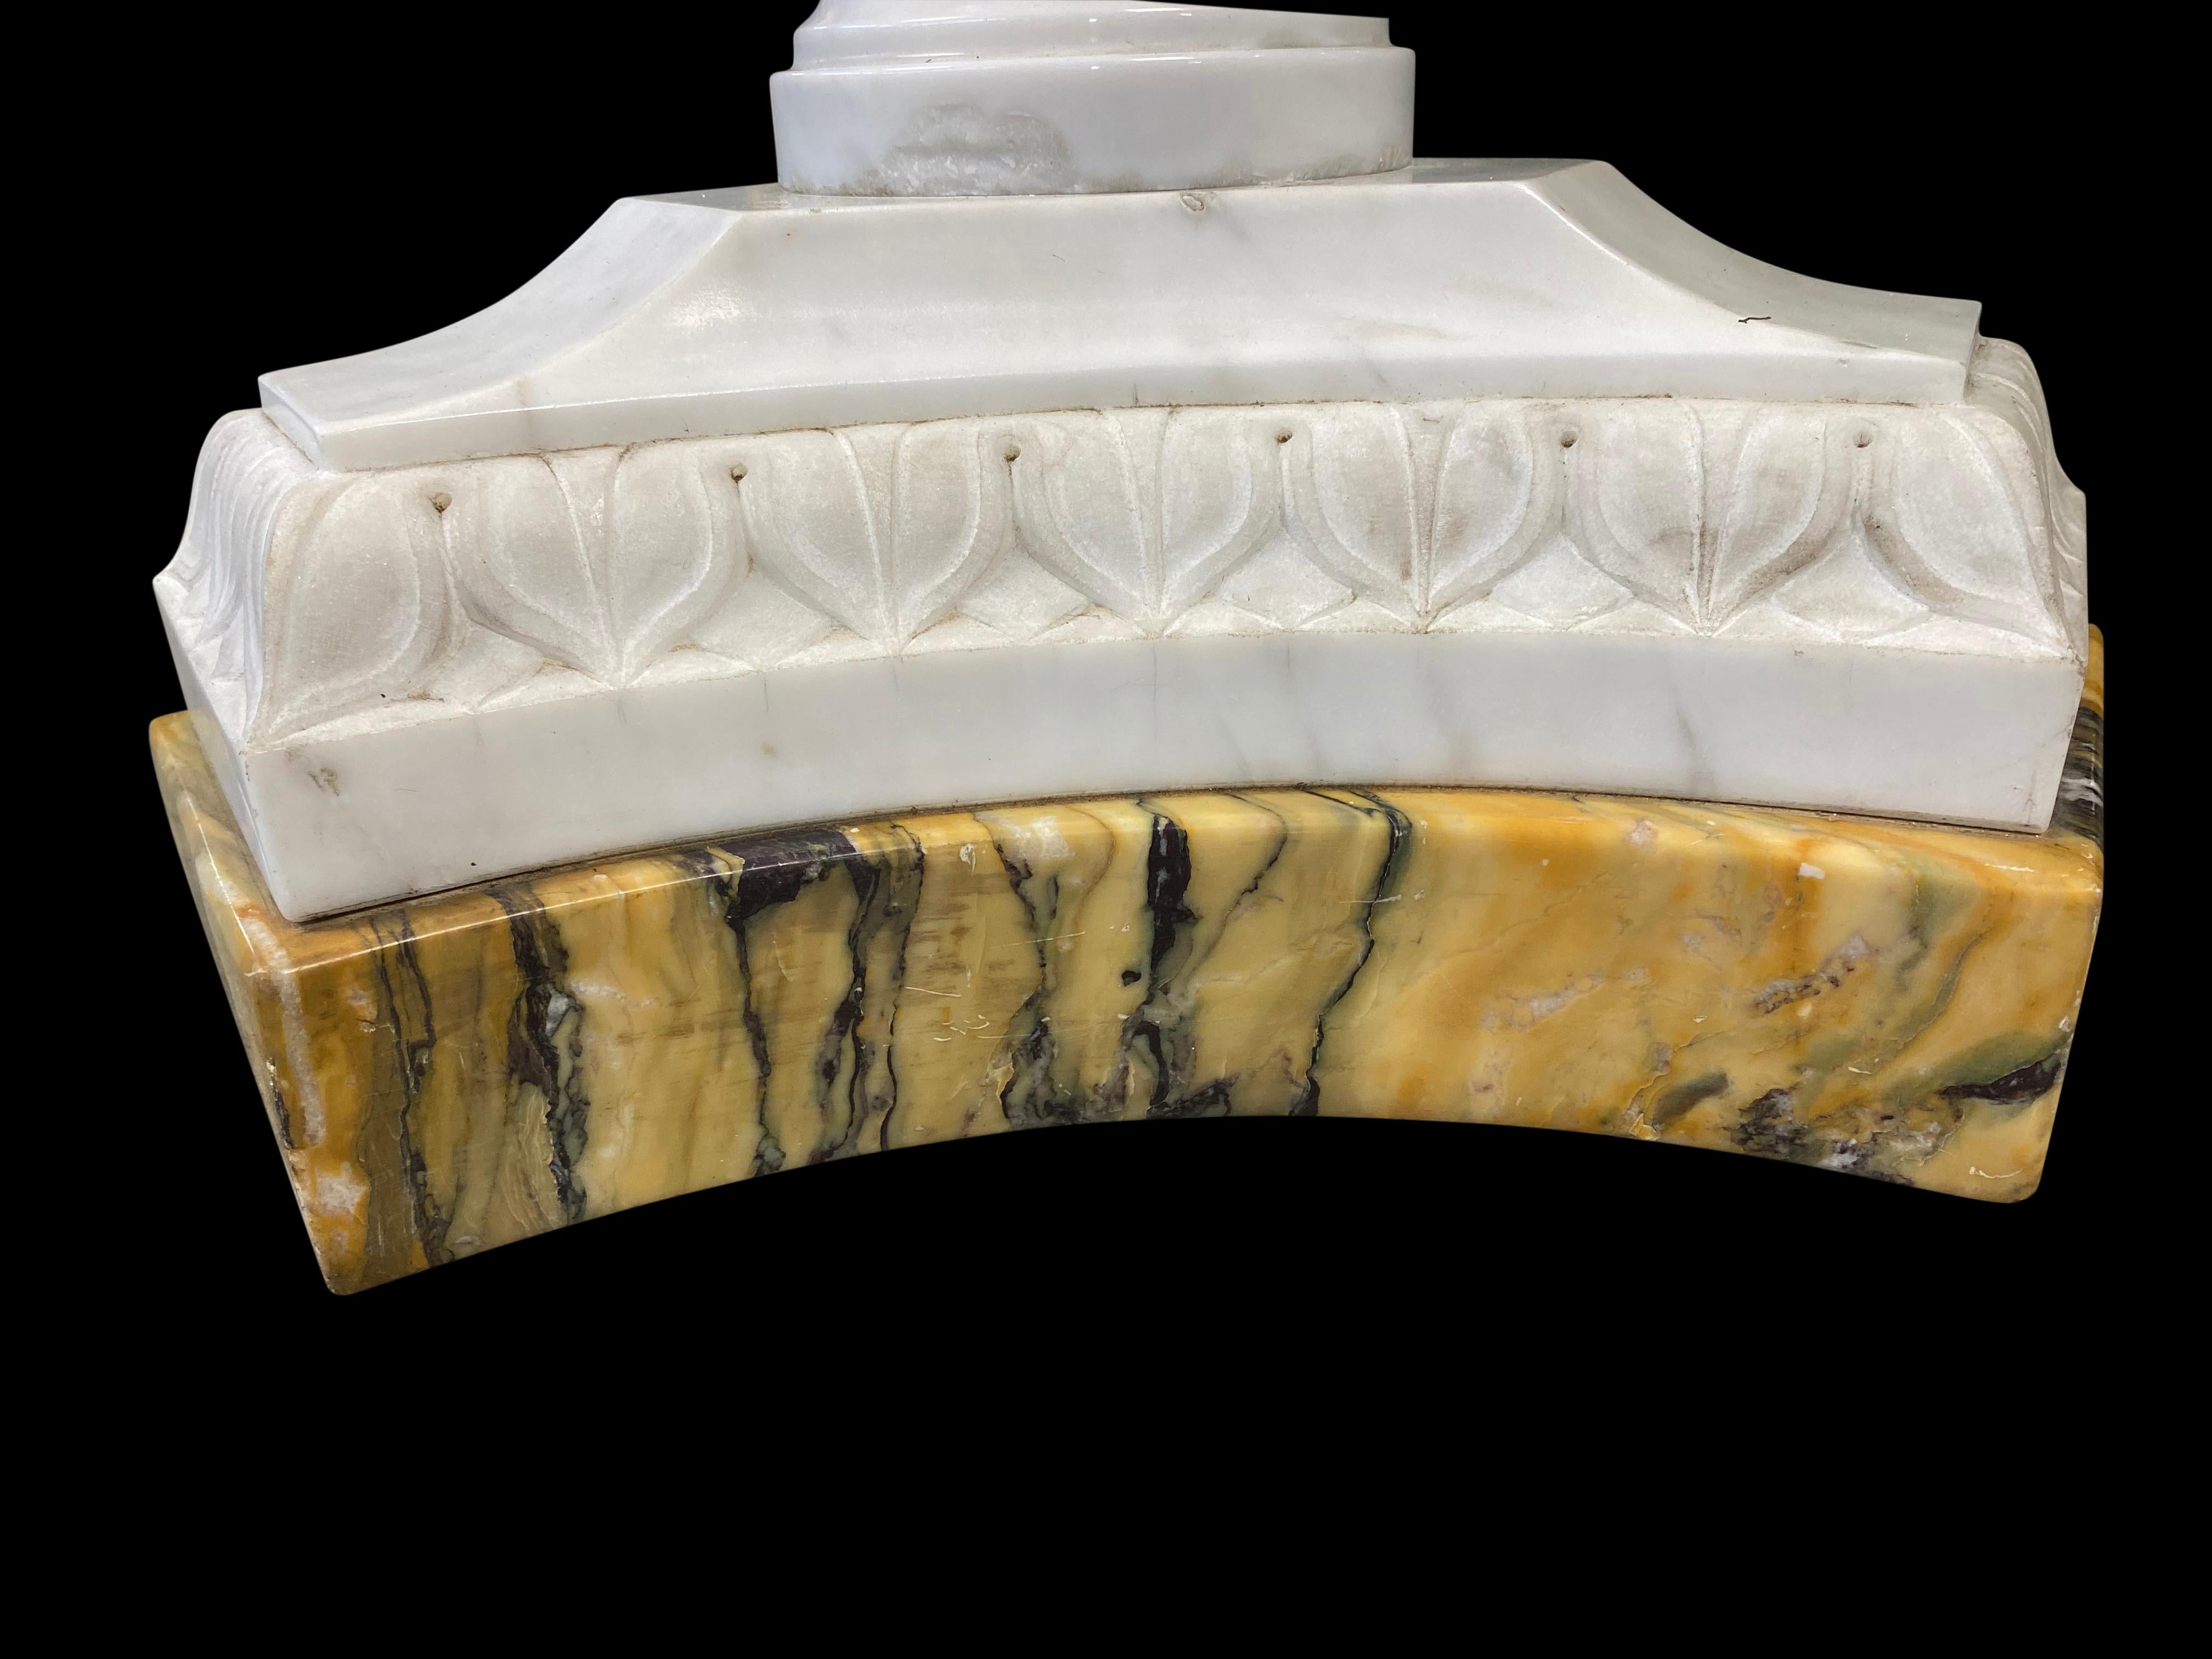 Inlay Italian White Statuary and Sienna Marble Table, 19th-20th Century For Sale